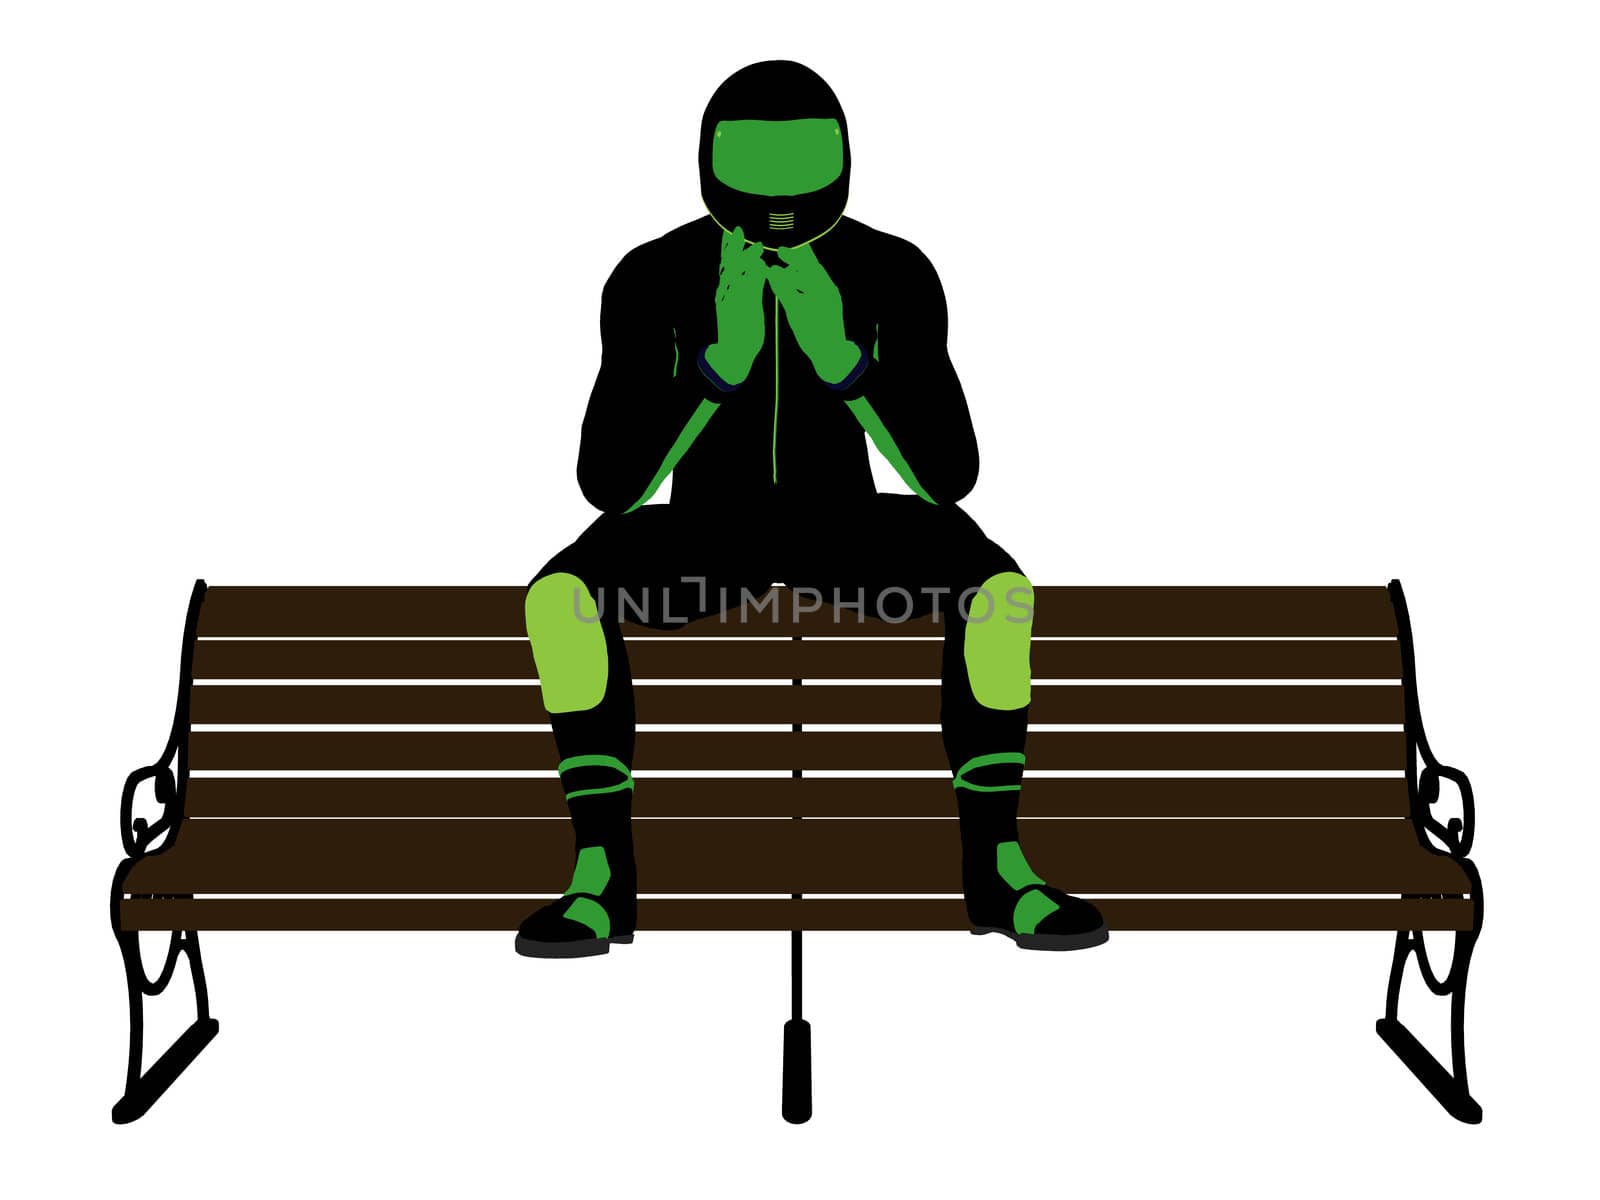 Male Motorcycle Rider sitting on a bench Silhouette by kathygold